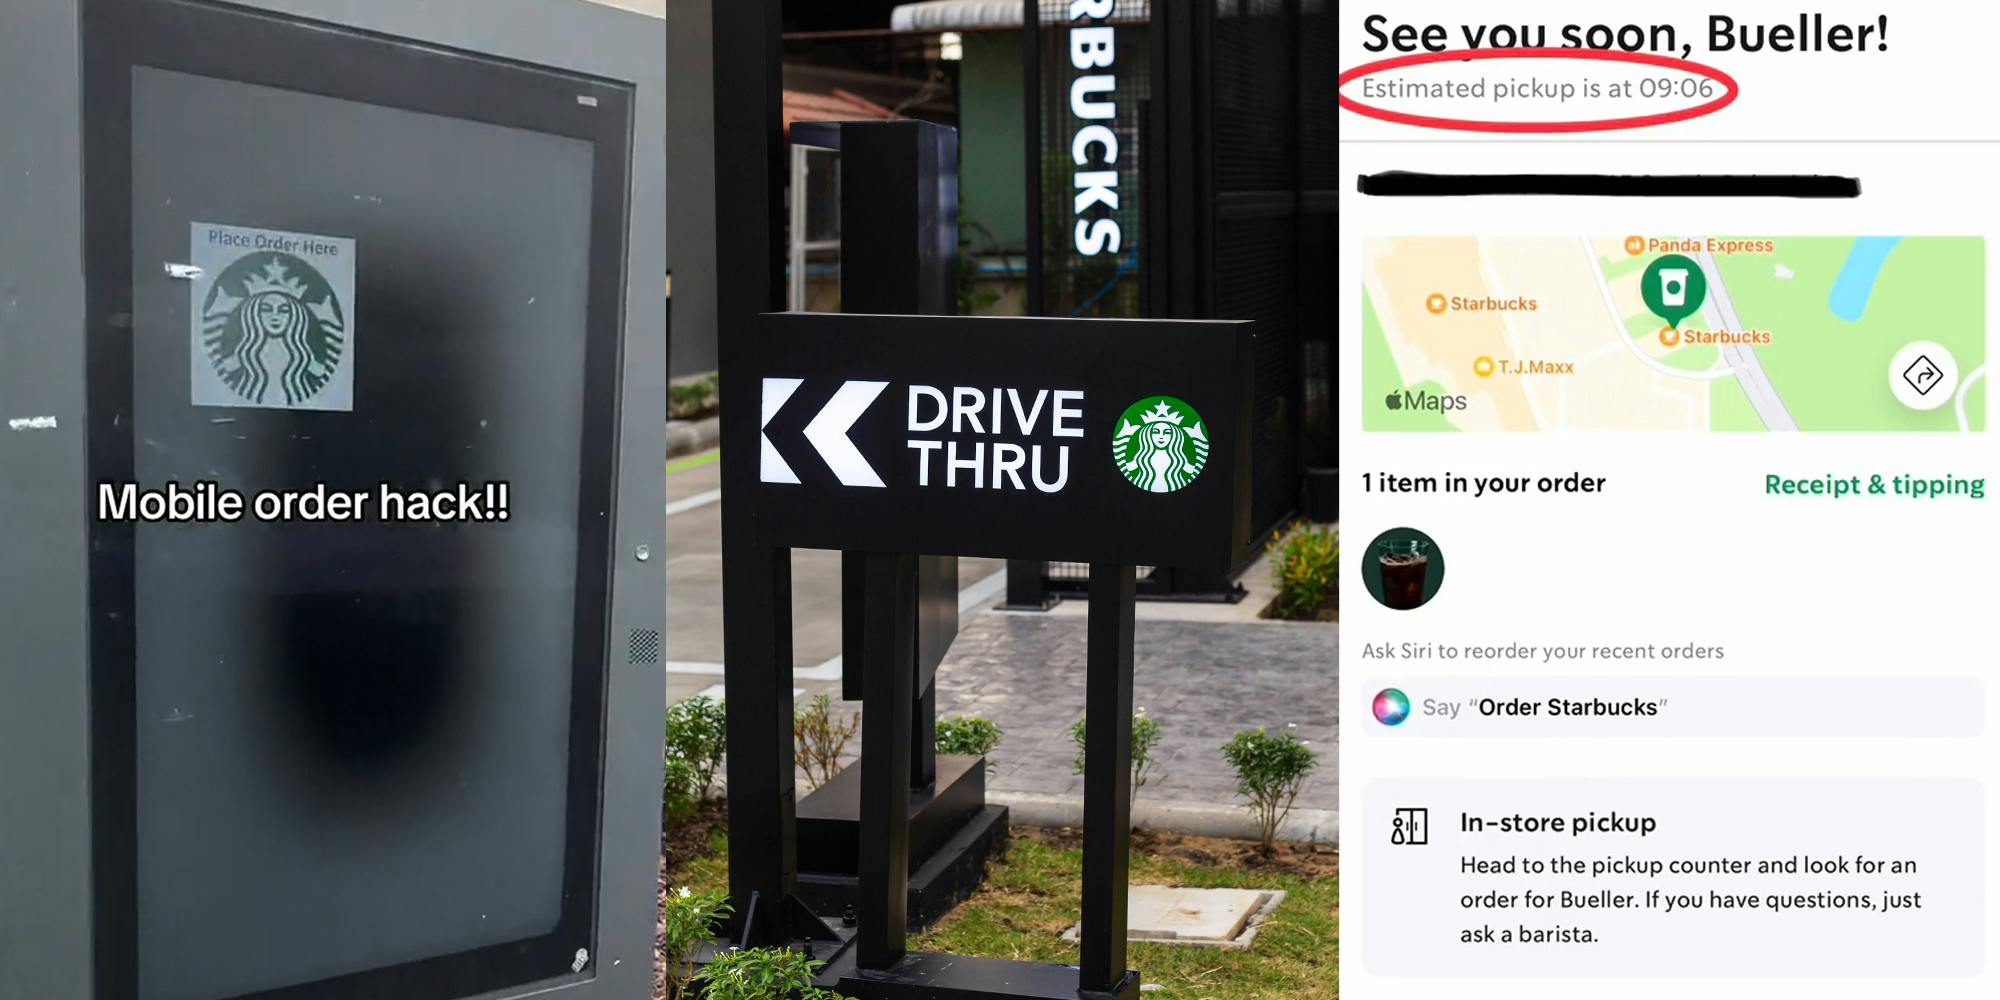 Starbucks drive thru order screen with caption "Mobile order hack!!" (l) Starbucks drive thru with signs (c) Starbucks mobile order with time circled with red (r)